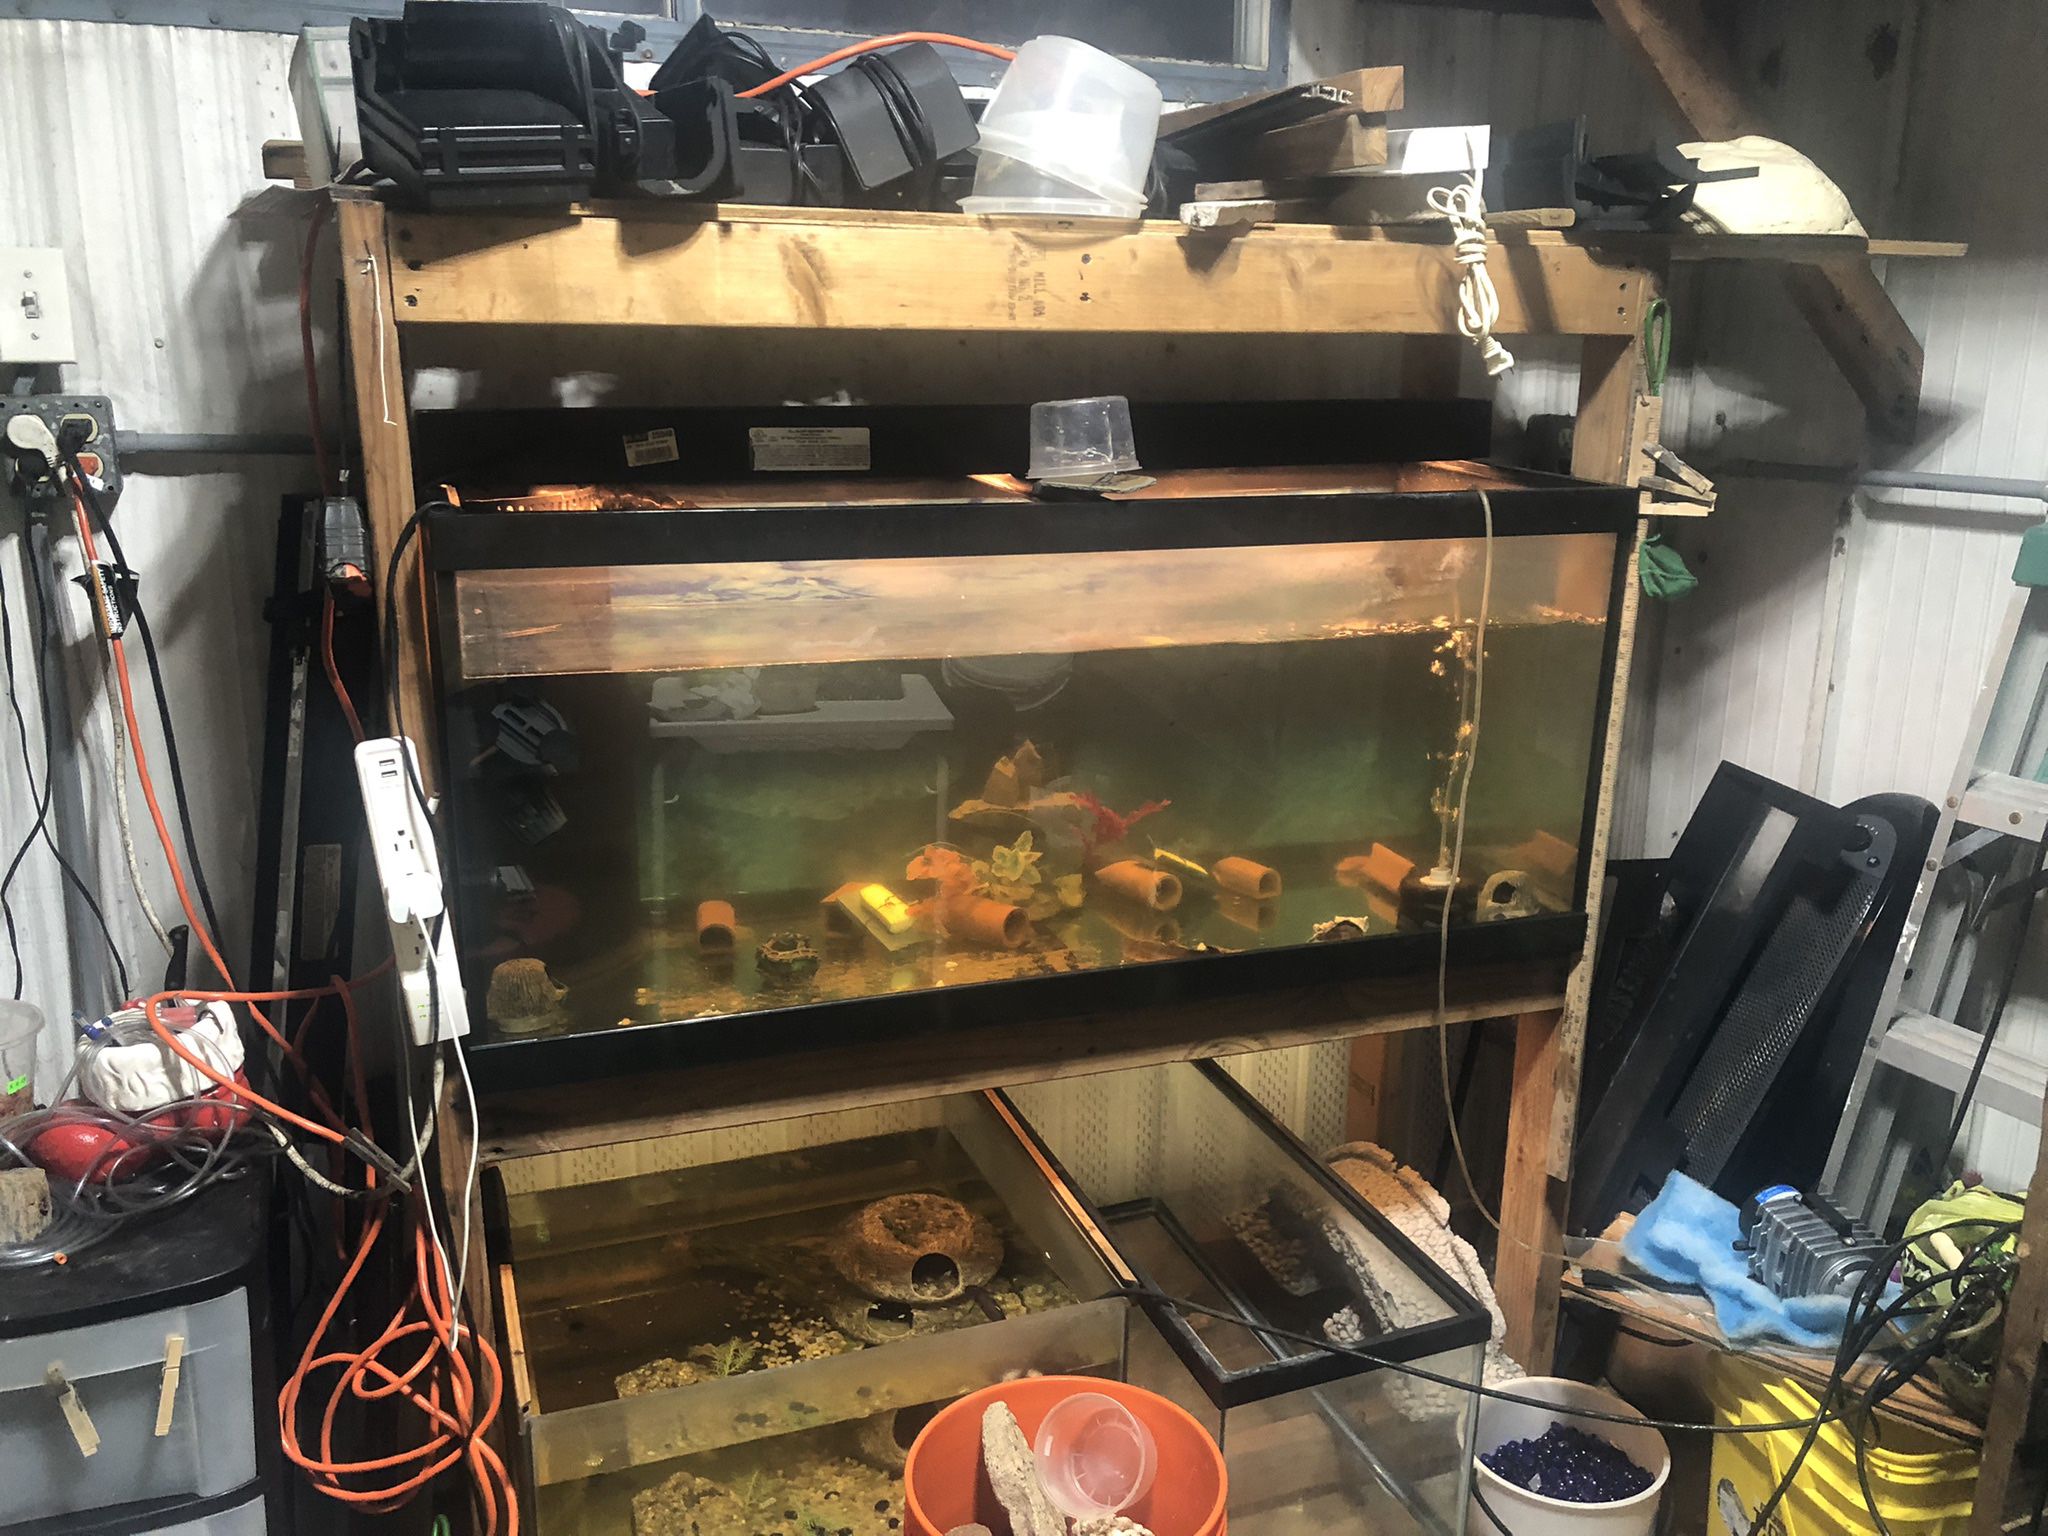 Complete Fishroom Everything You Could Possibly Need. 